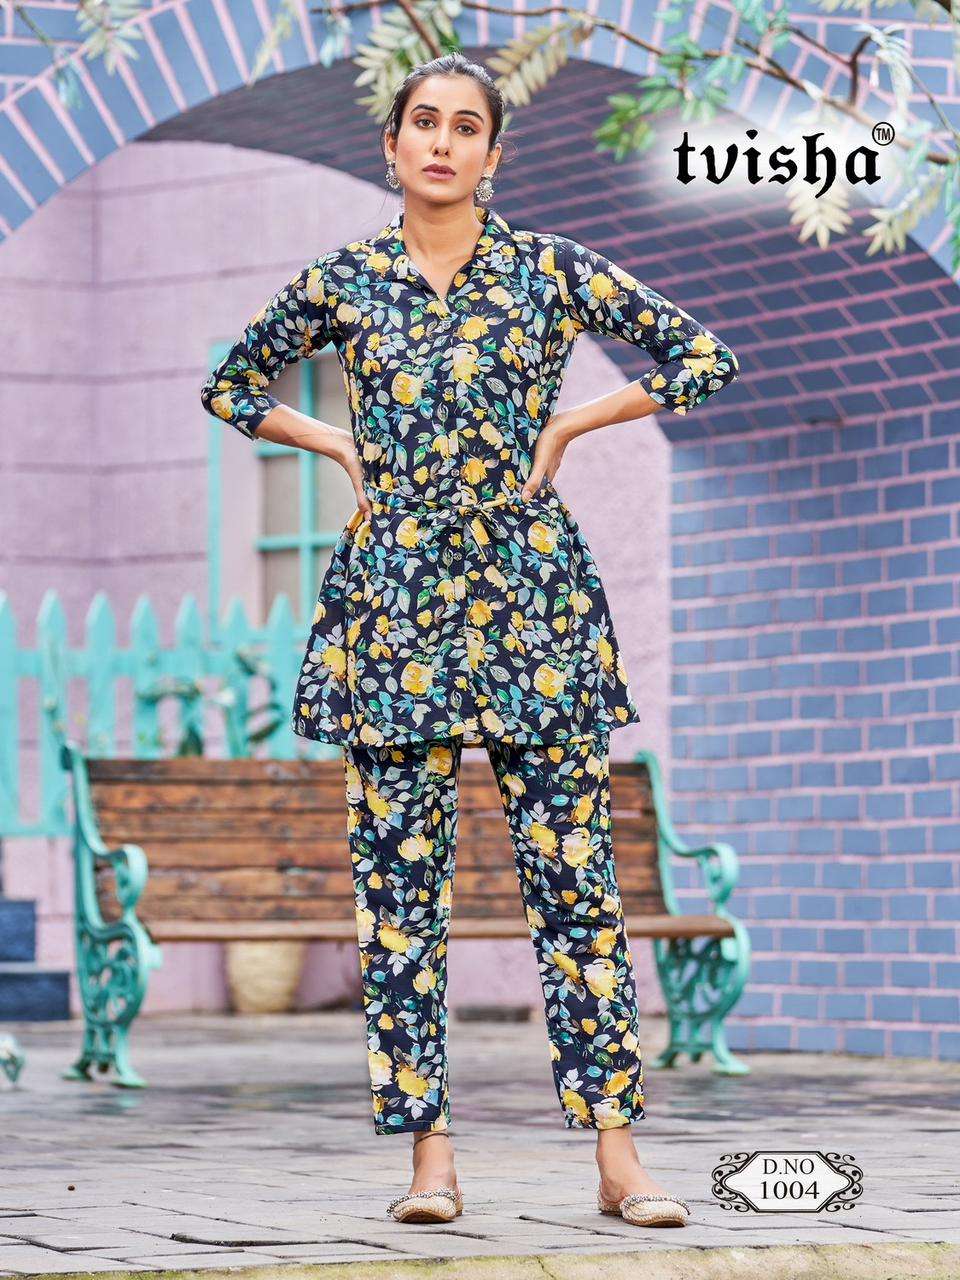 blossom coord set in best 6 prints fabric soft rayon print center belt will come stylish girlish womens cord set collection for dailywear 